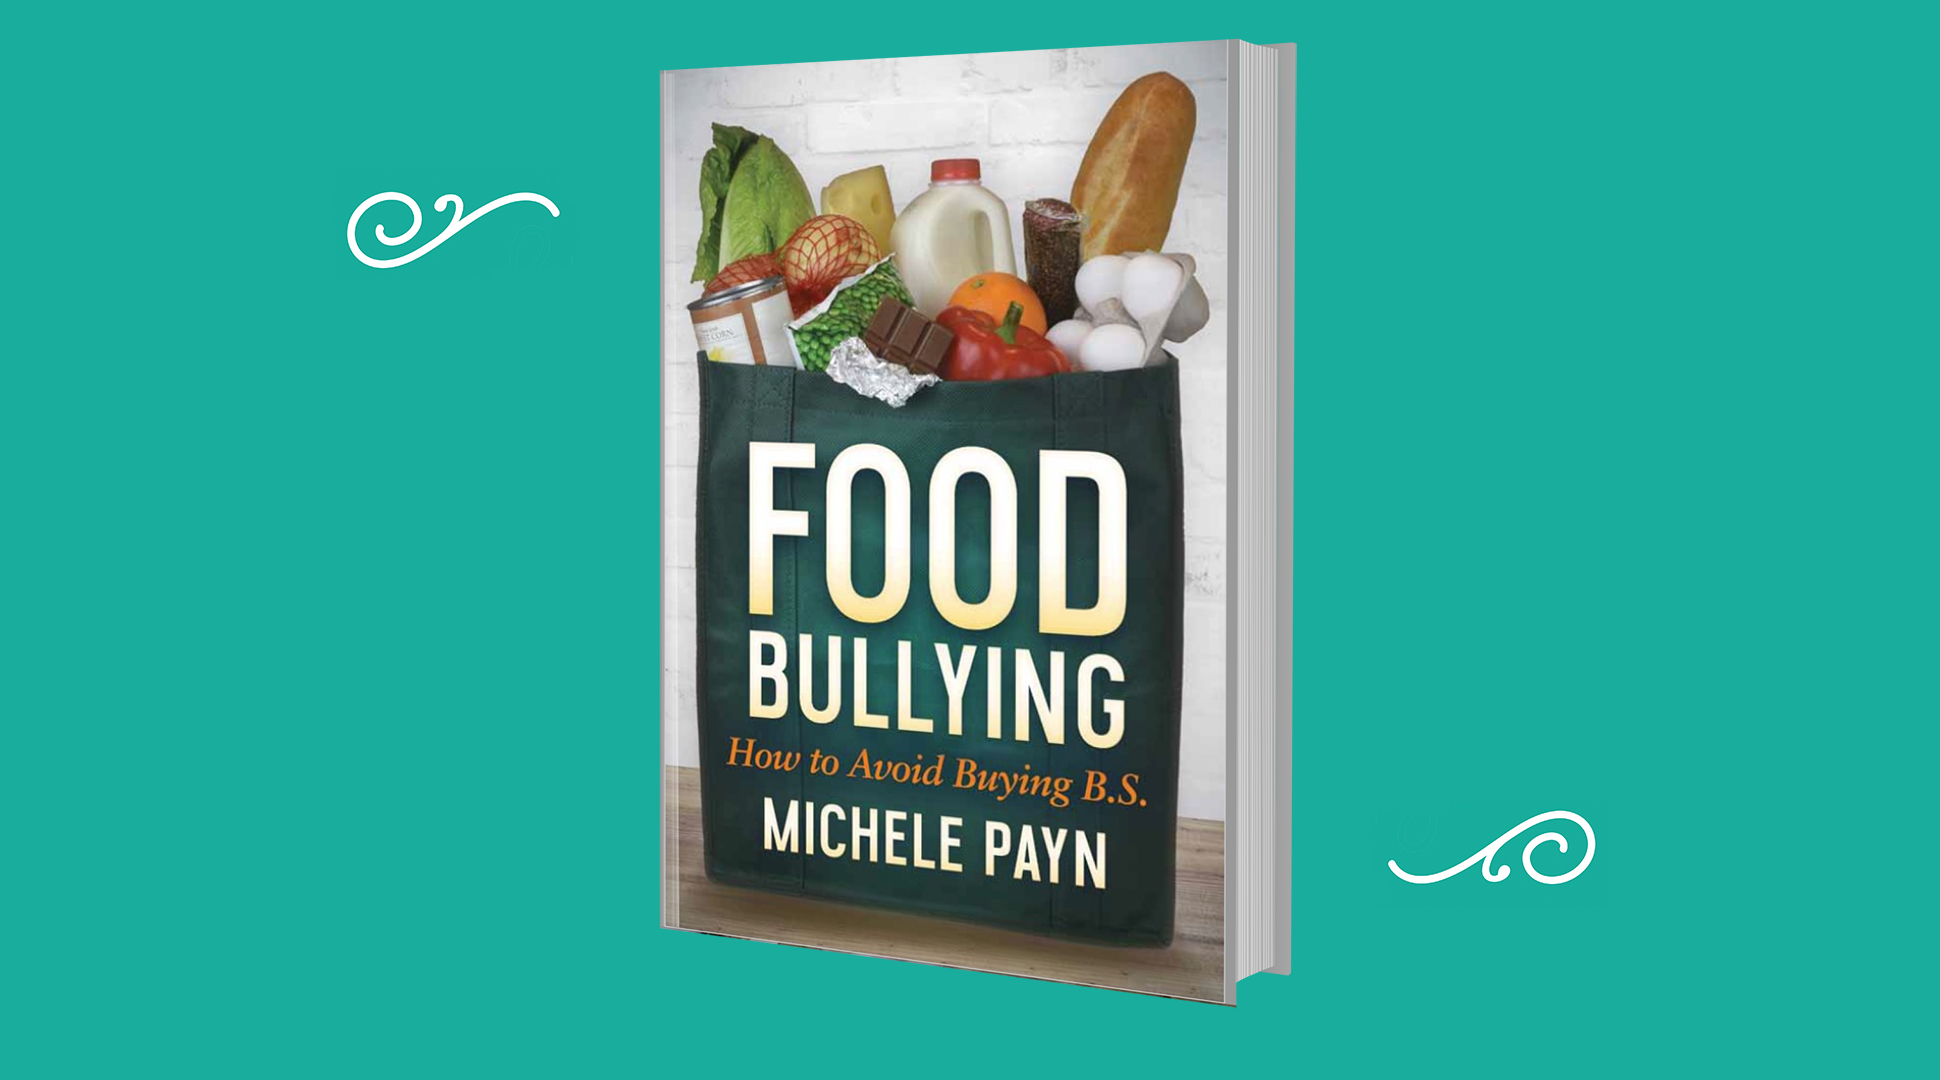 Have you been food bullied?